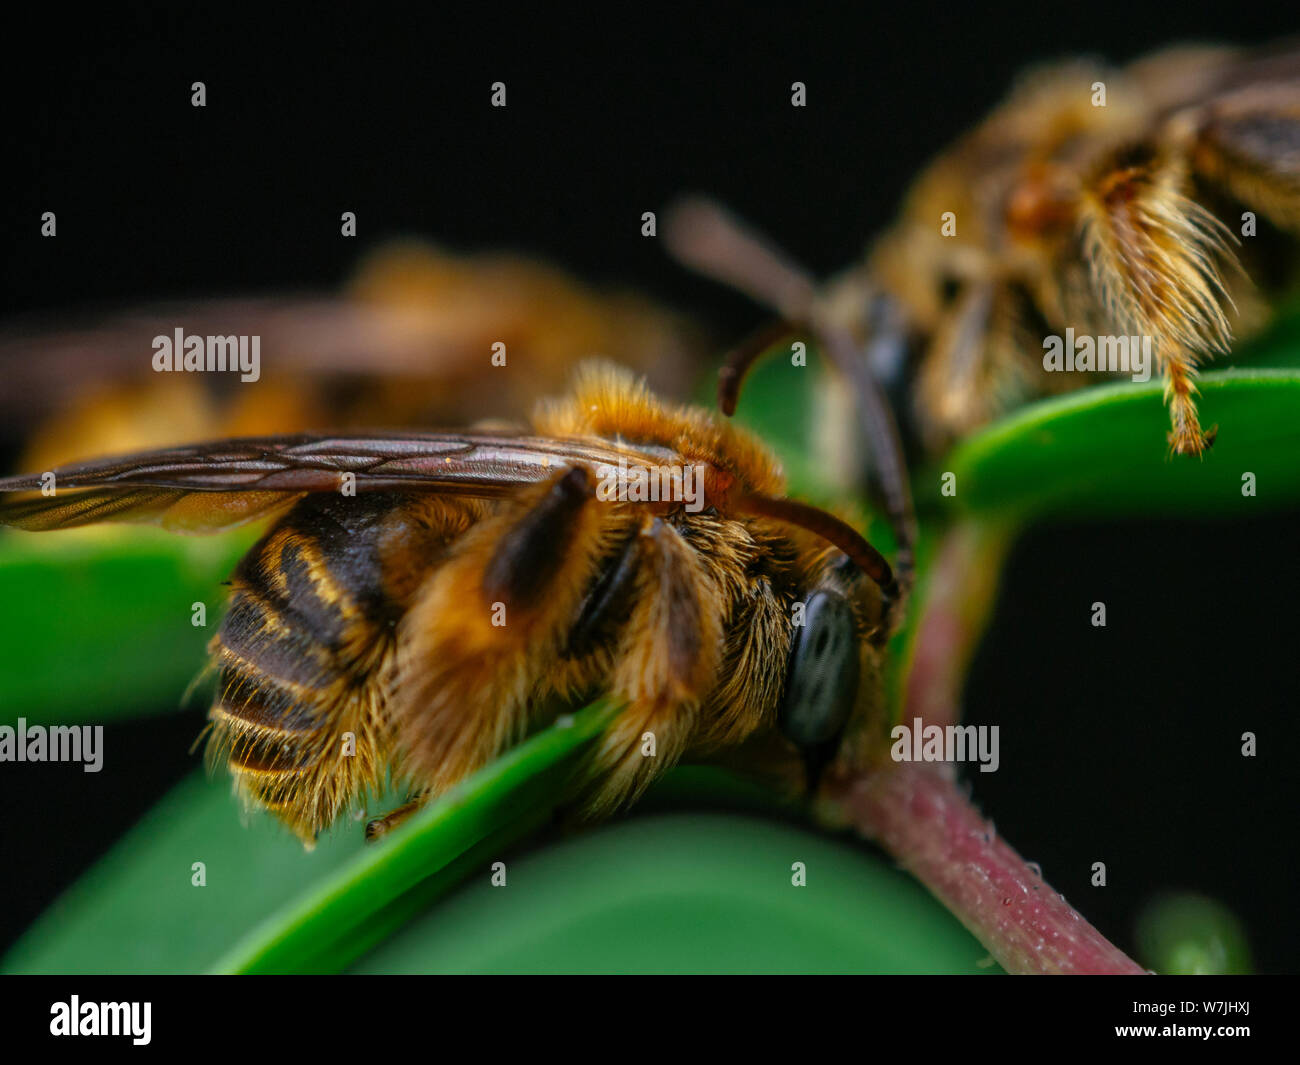 Group of wild bees (Exomalopsis) sleeping with mandibles attached to a plant in a tropical garden from Brazil Stock Photo